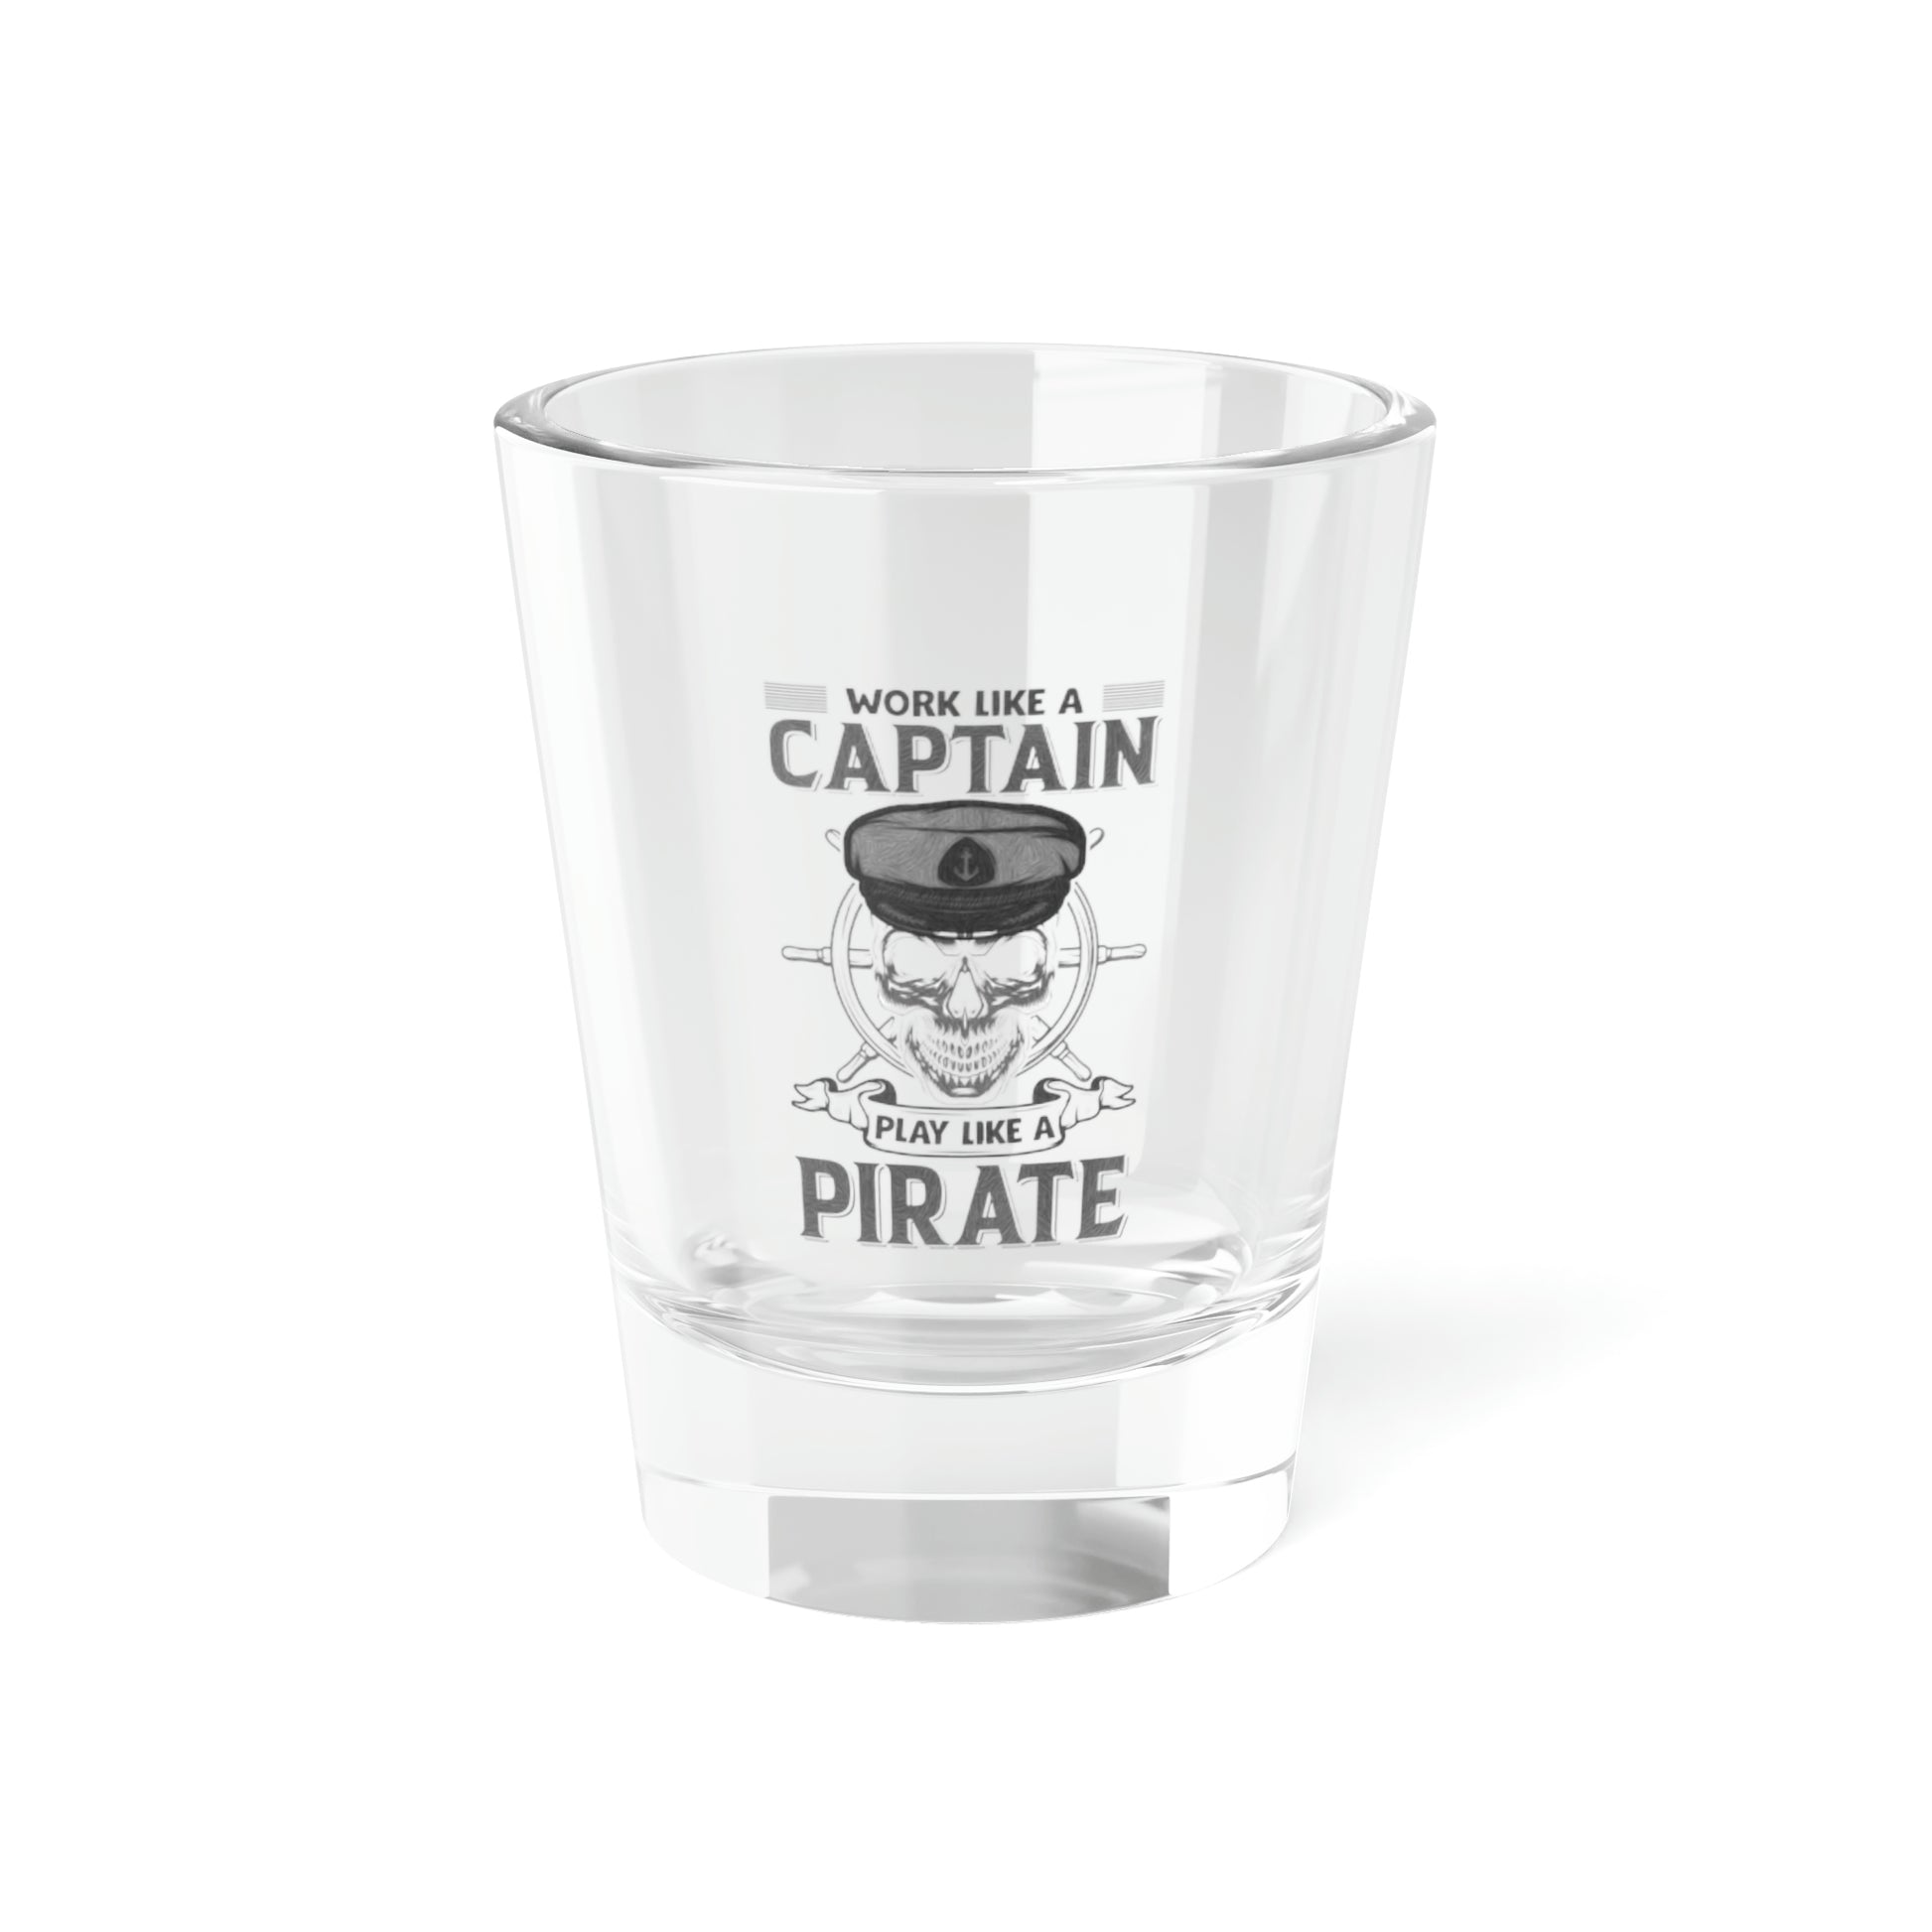 Clear glass pirate shot glass with motivational message